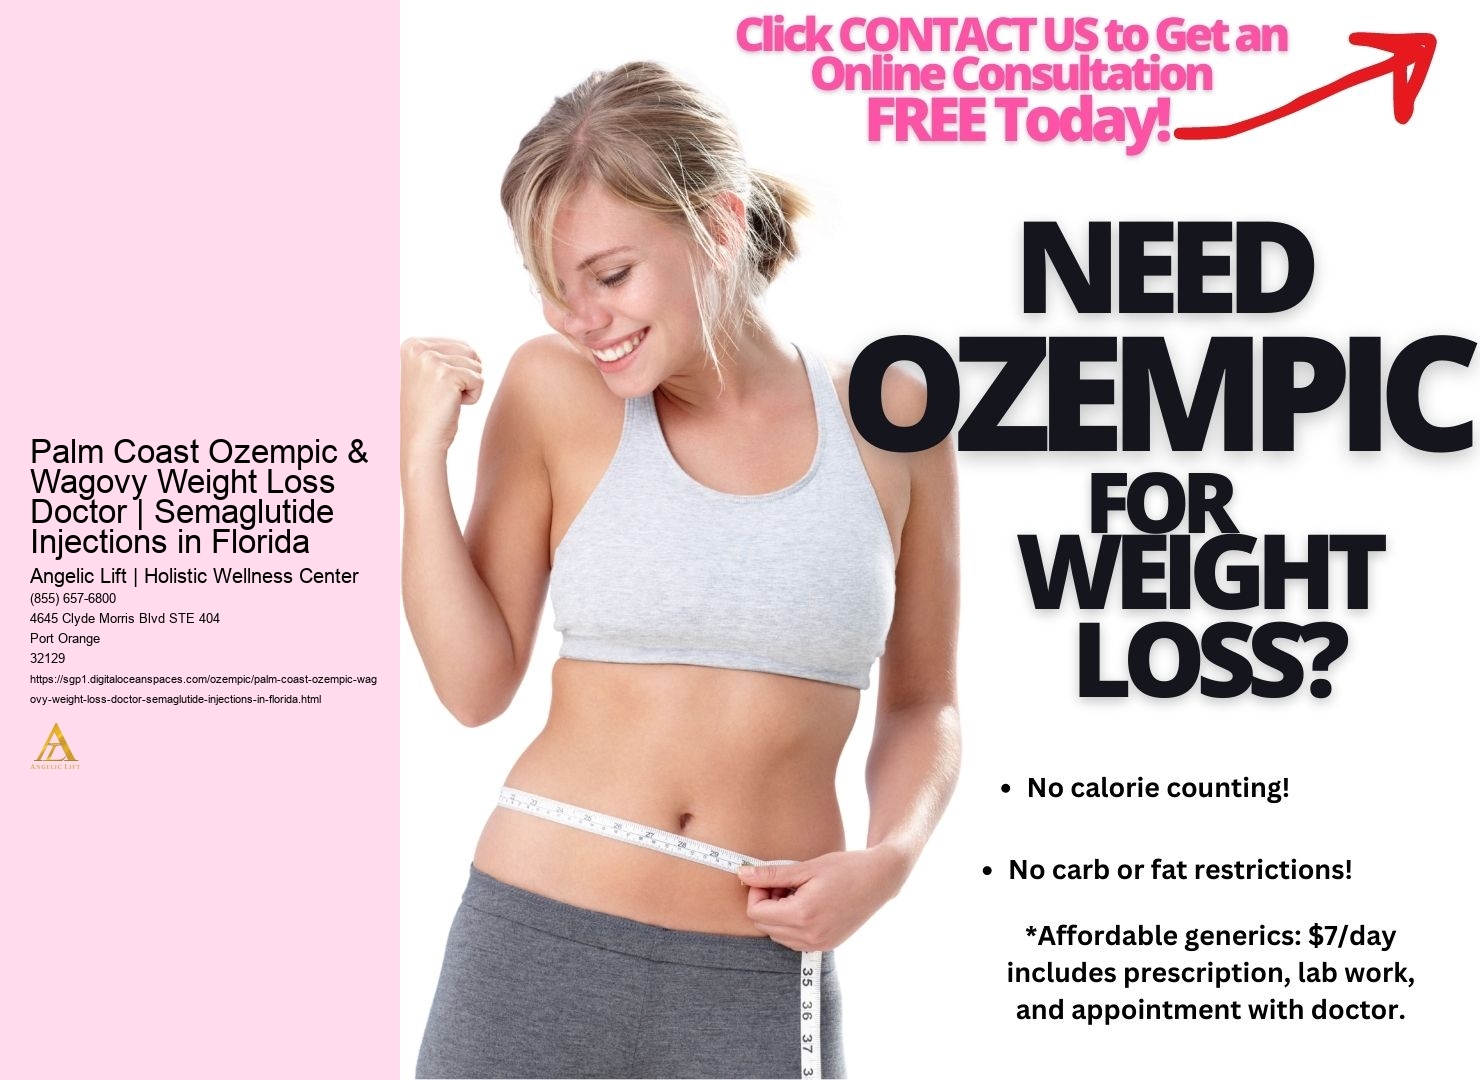 Palm Coast Ozempic & Wagovy Weight Loss Doctor | Semaglutide Injections in Florida